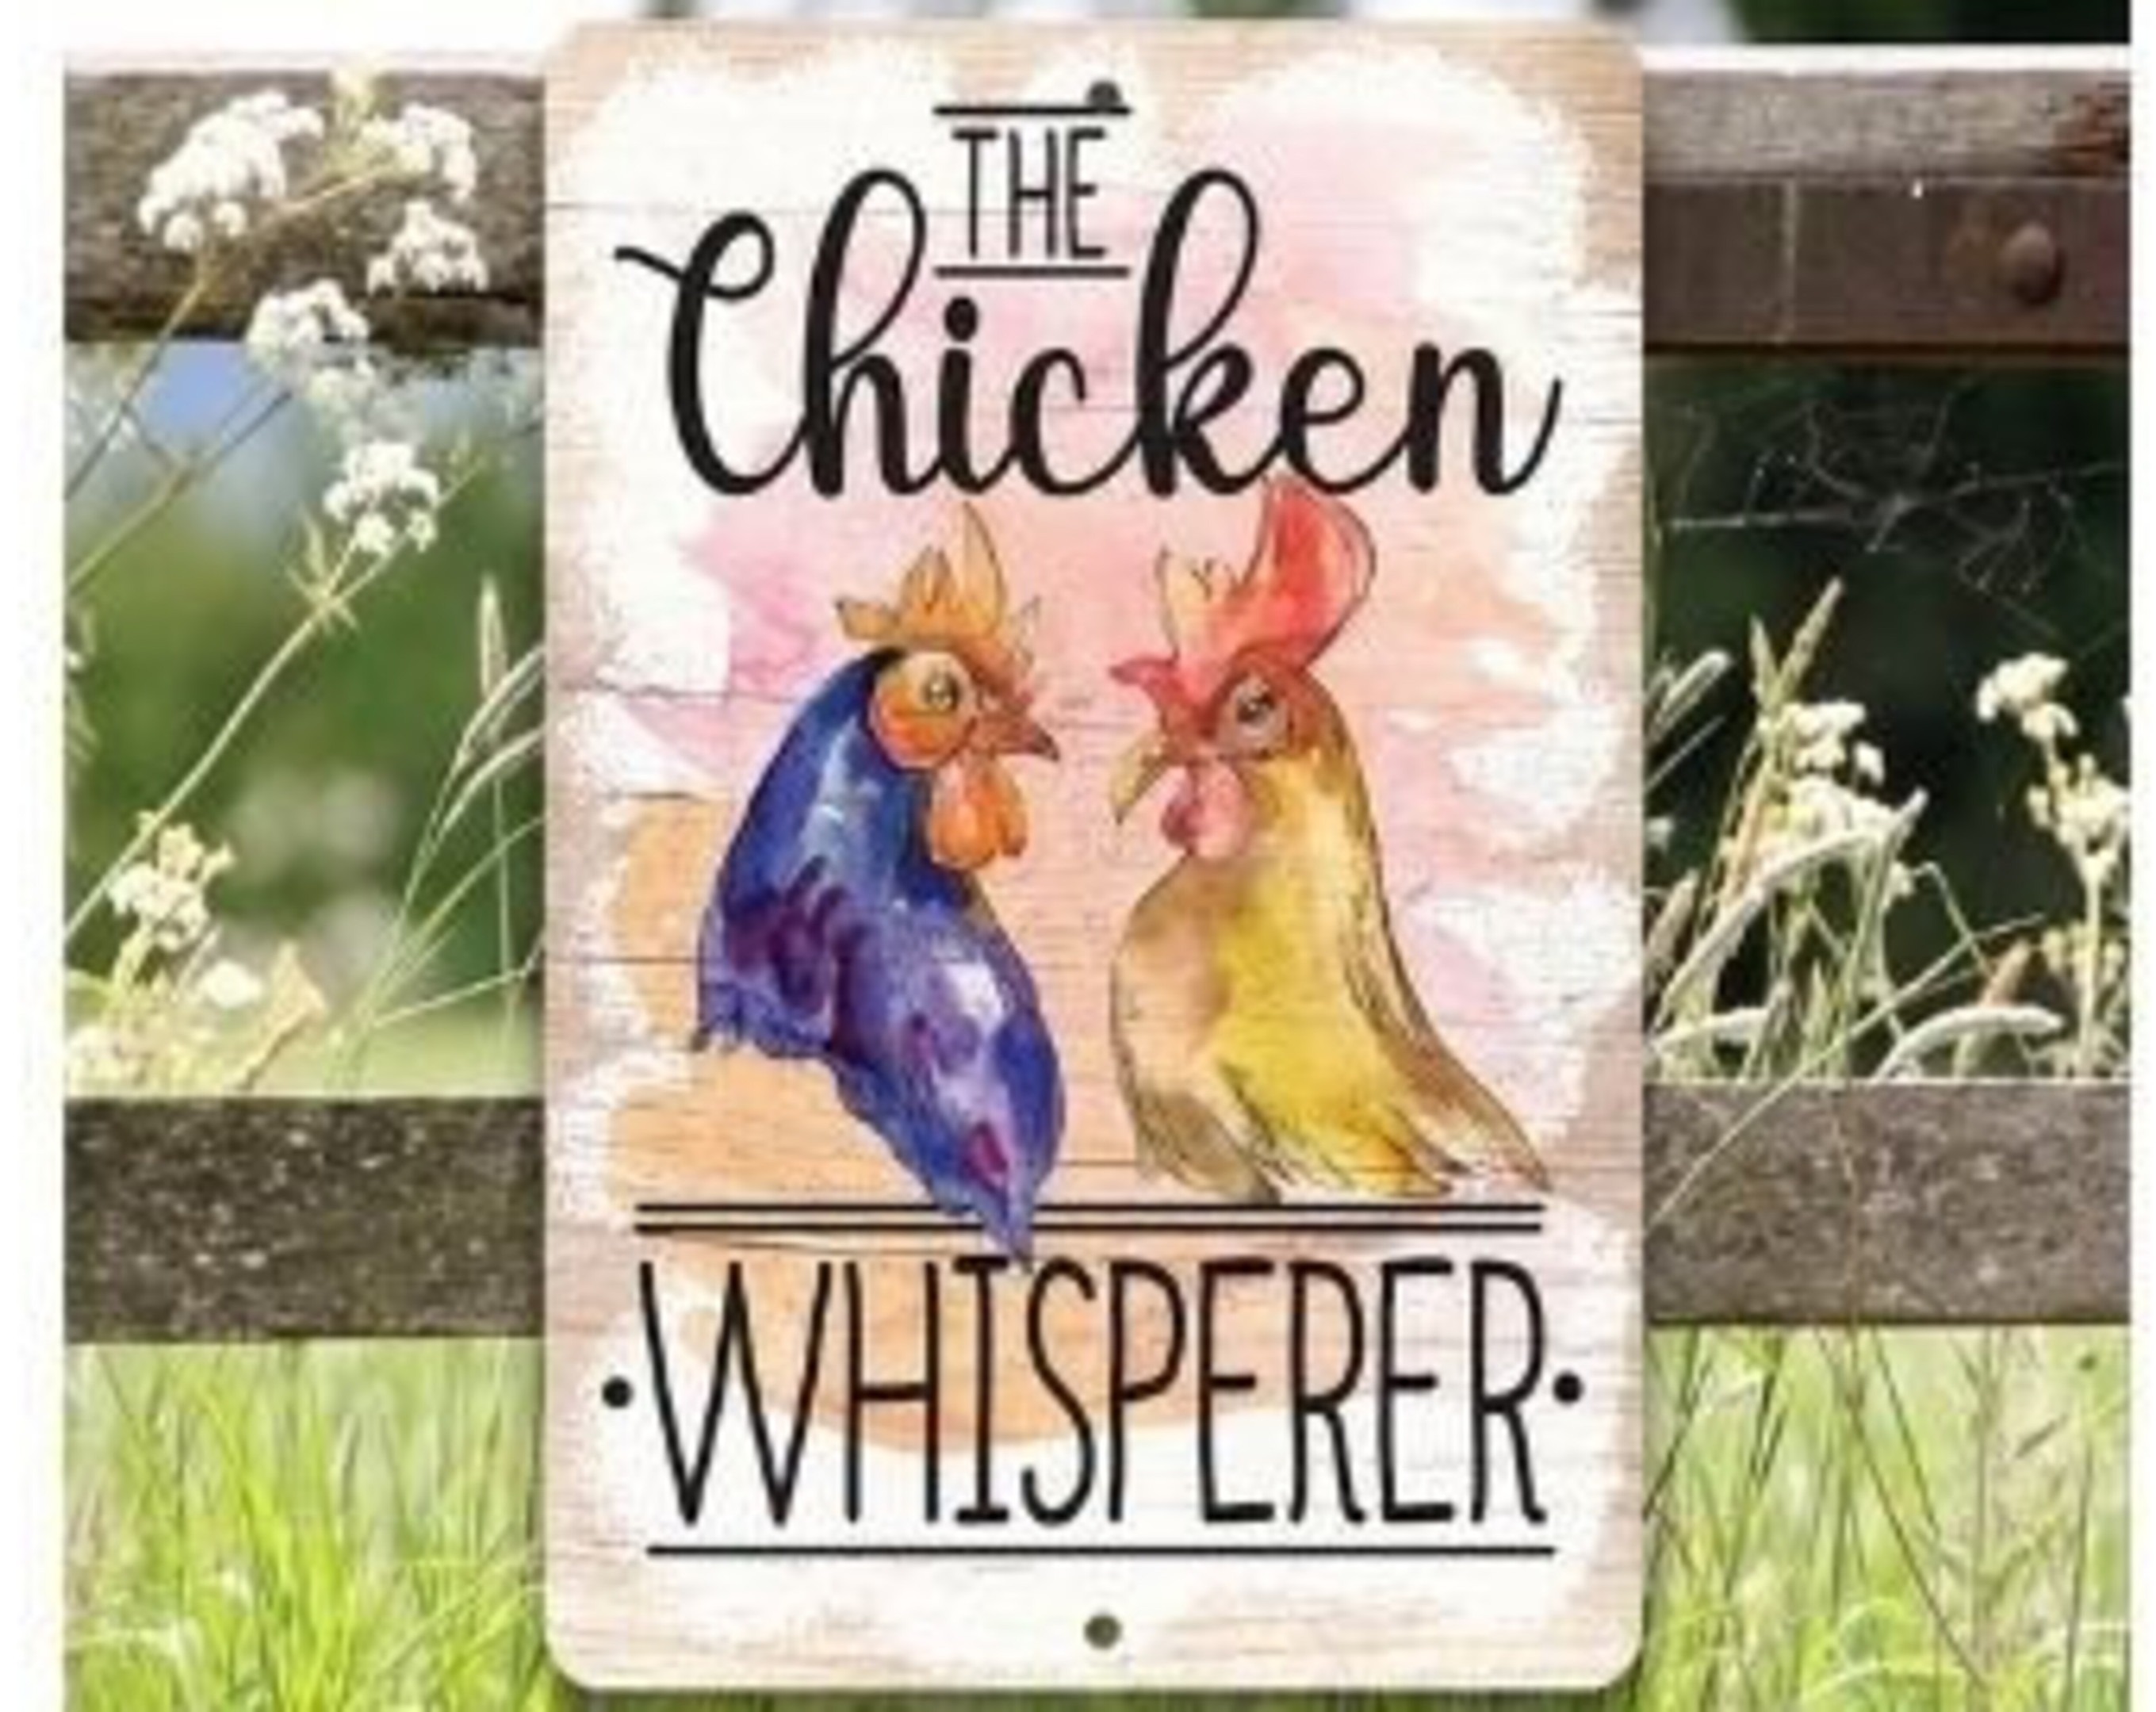 The Chicken Whisperer Aluminum Tin Awesome Metal Poster